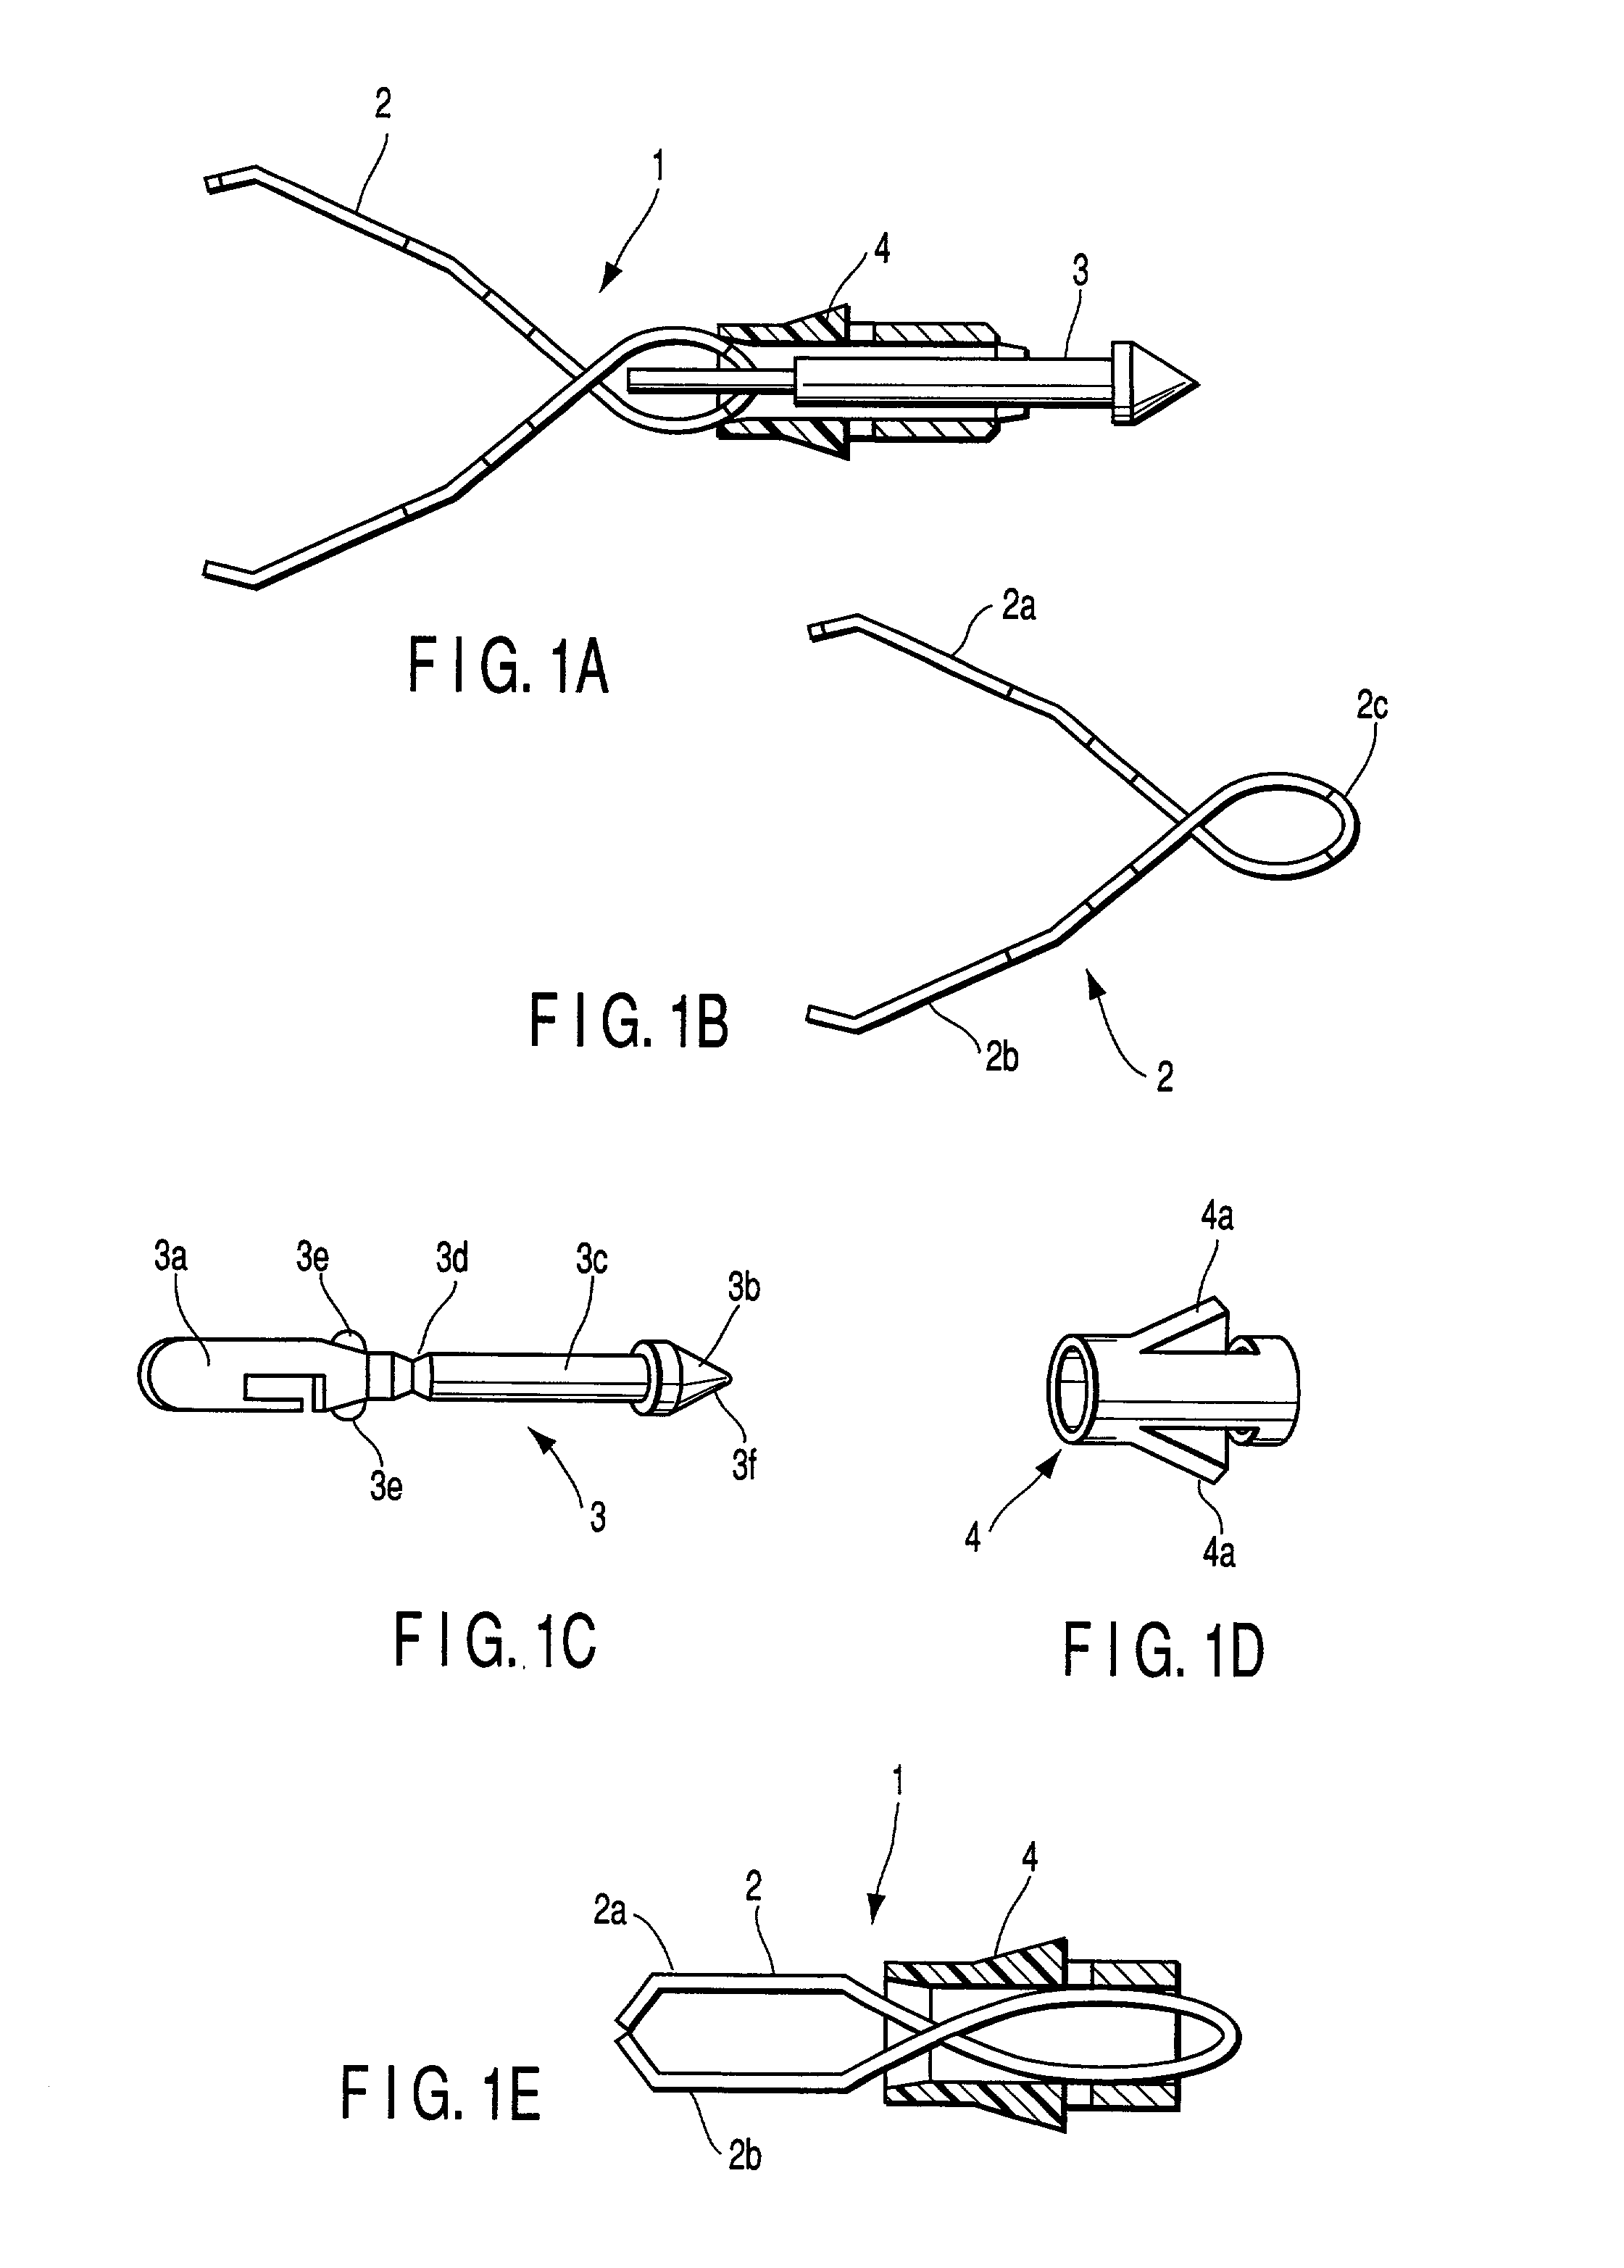 Physiological tissue clipping apparatus, clipping method and clip unit mounting method